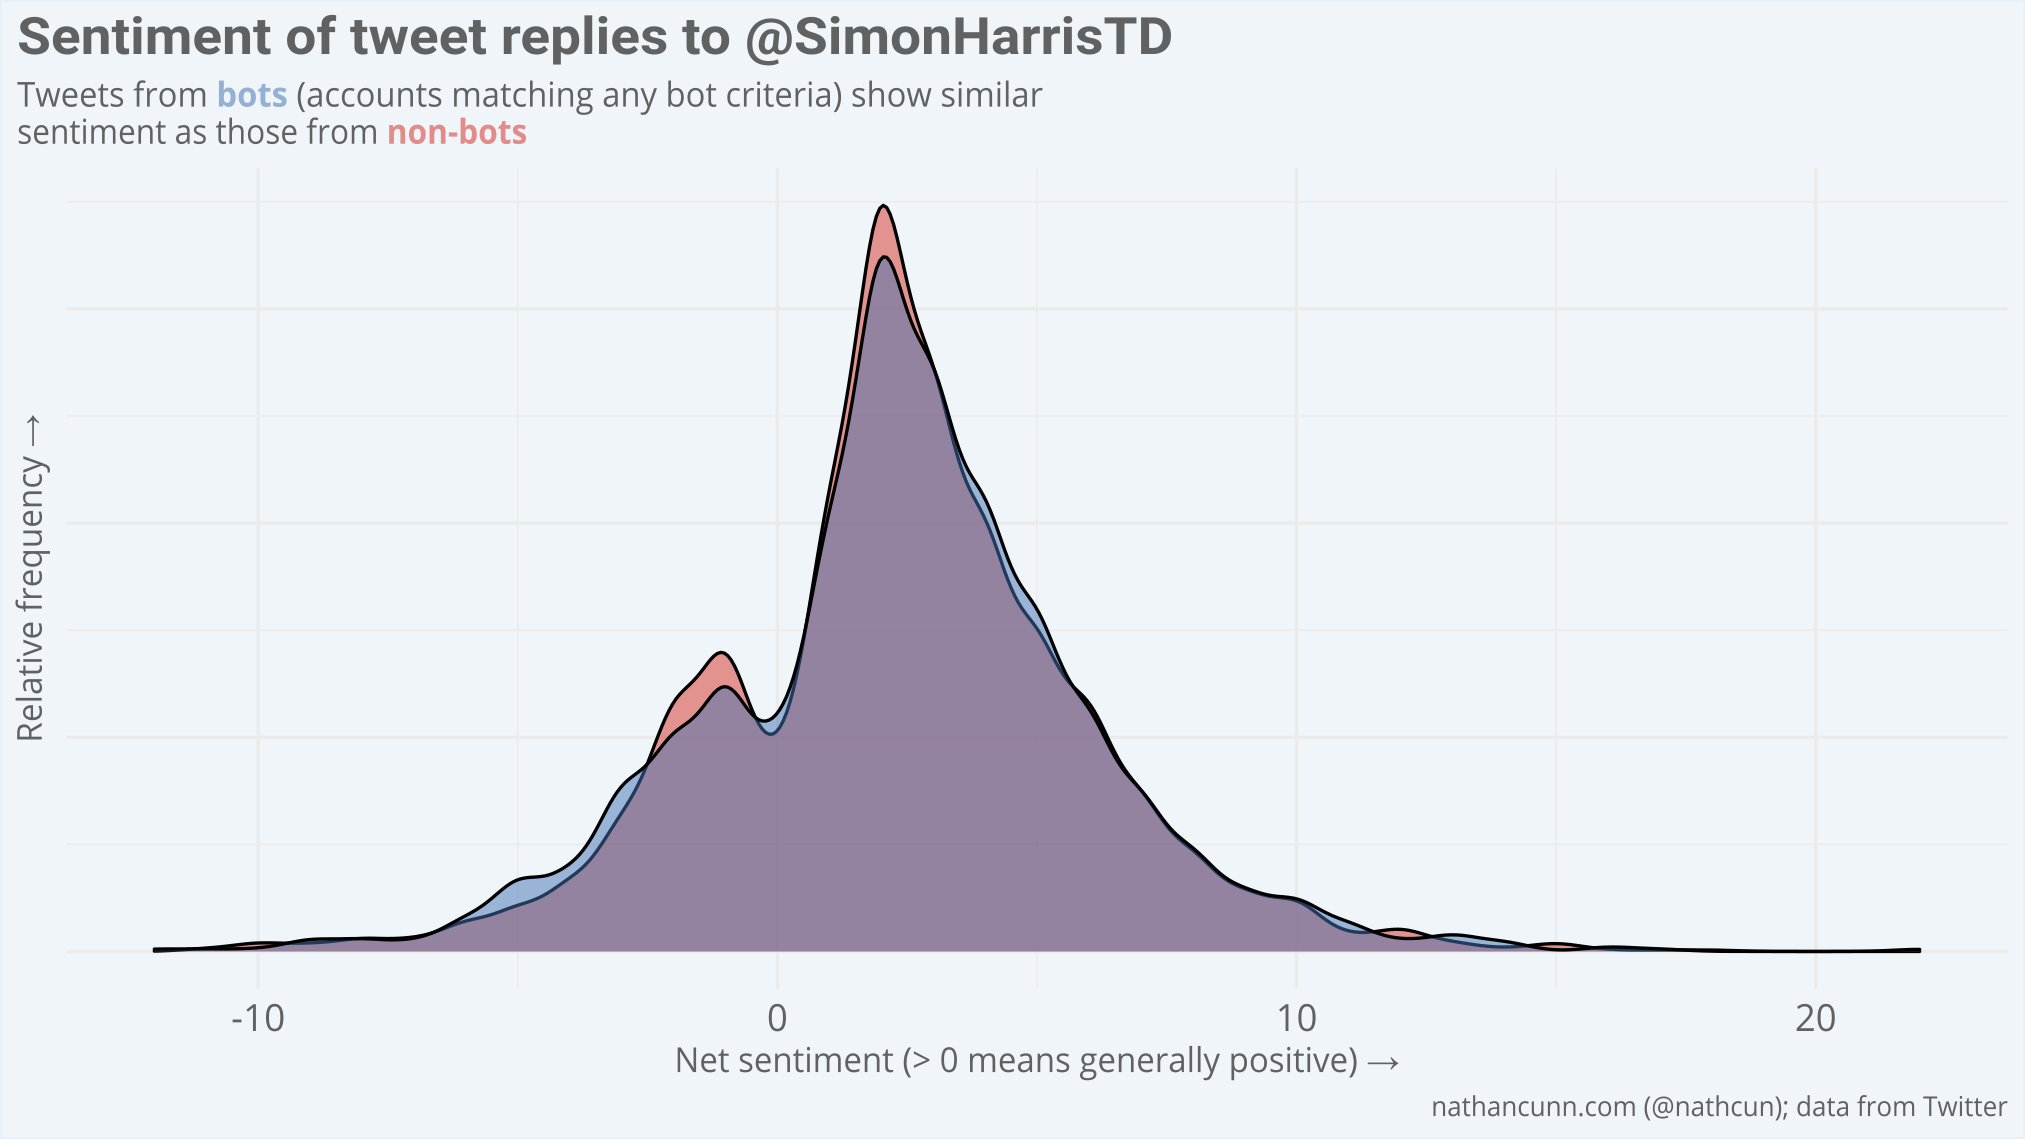 A density plot of the sentiment score of tweet replies to @SimonHarrisTD broken down by supposed bots and non-bots where bots are identified by matching any of the proposed bot criteria. No difference is observed between the two groups.